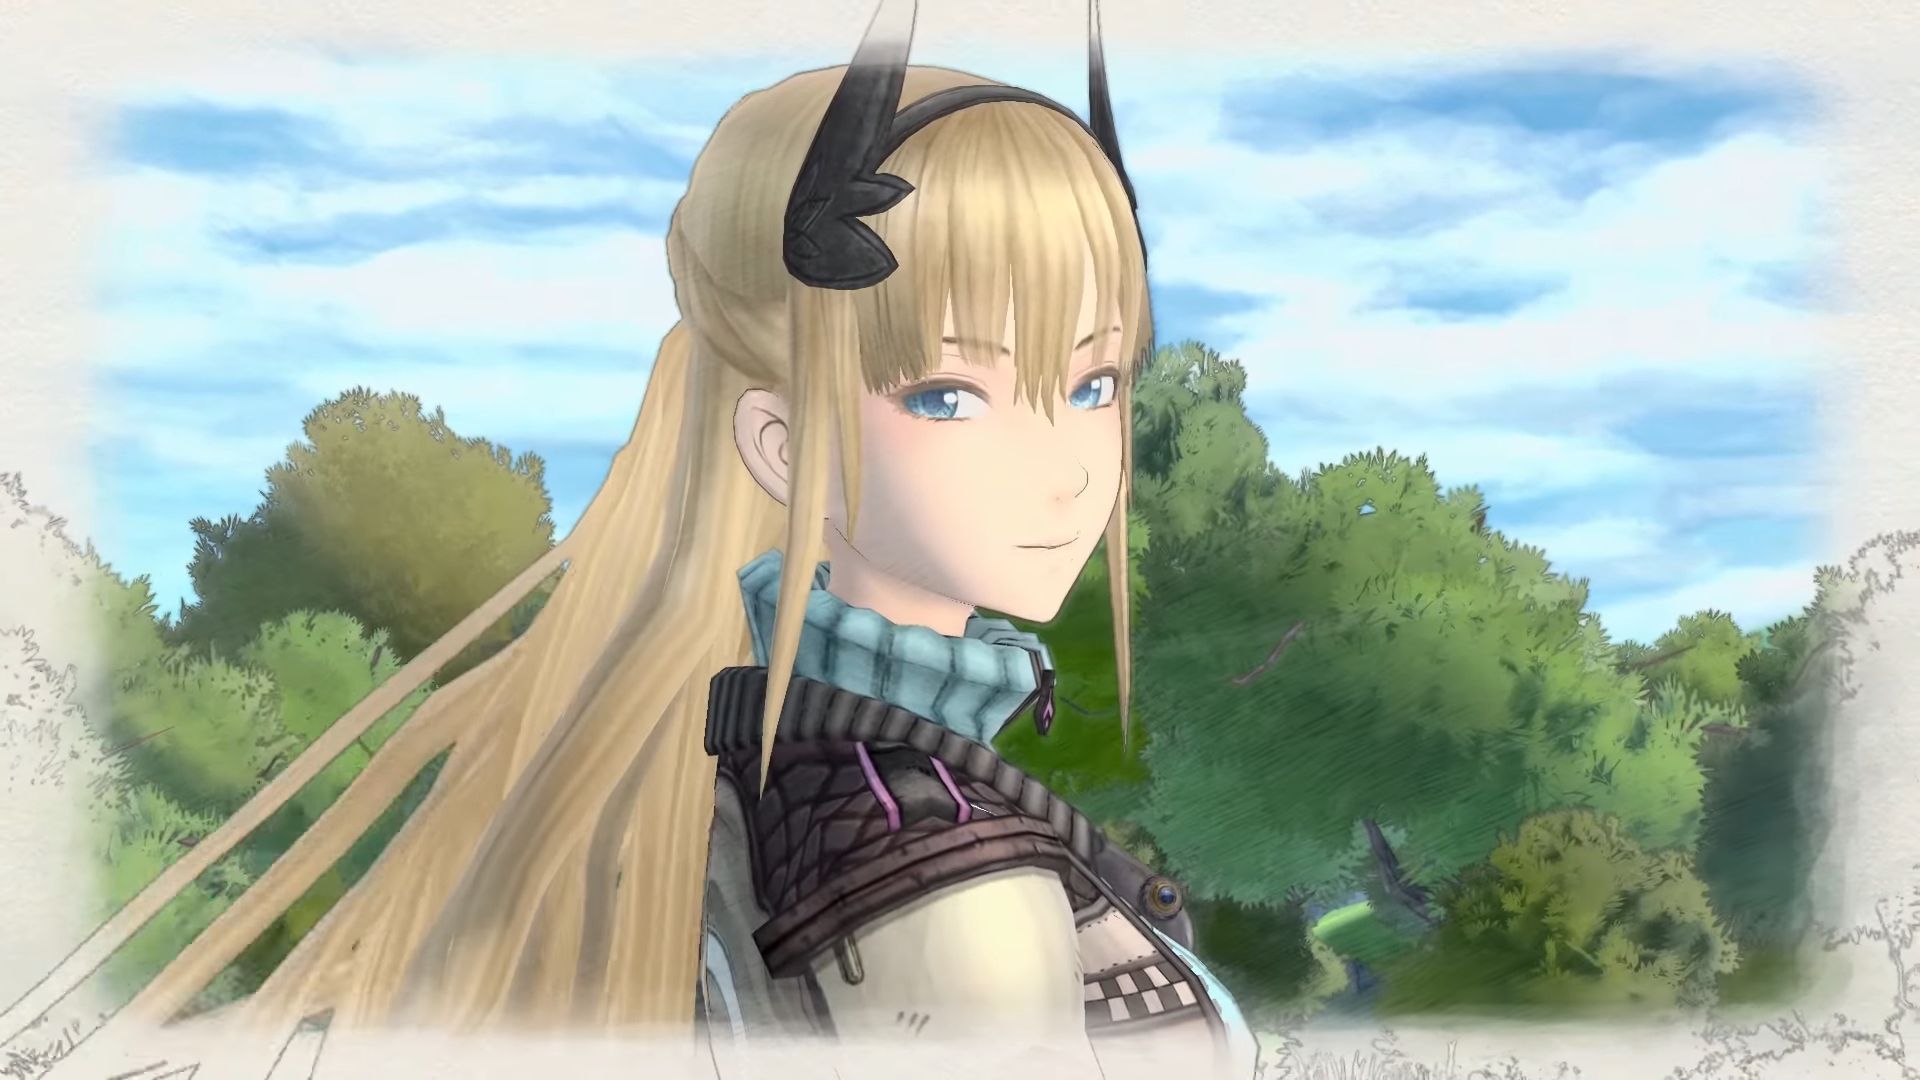 Valkyria Chronicles 4 PS4 Demo Available Now on Japanese